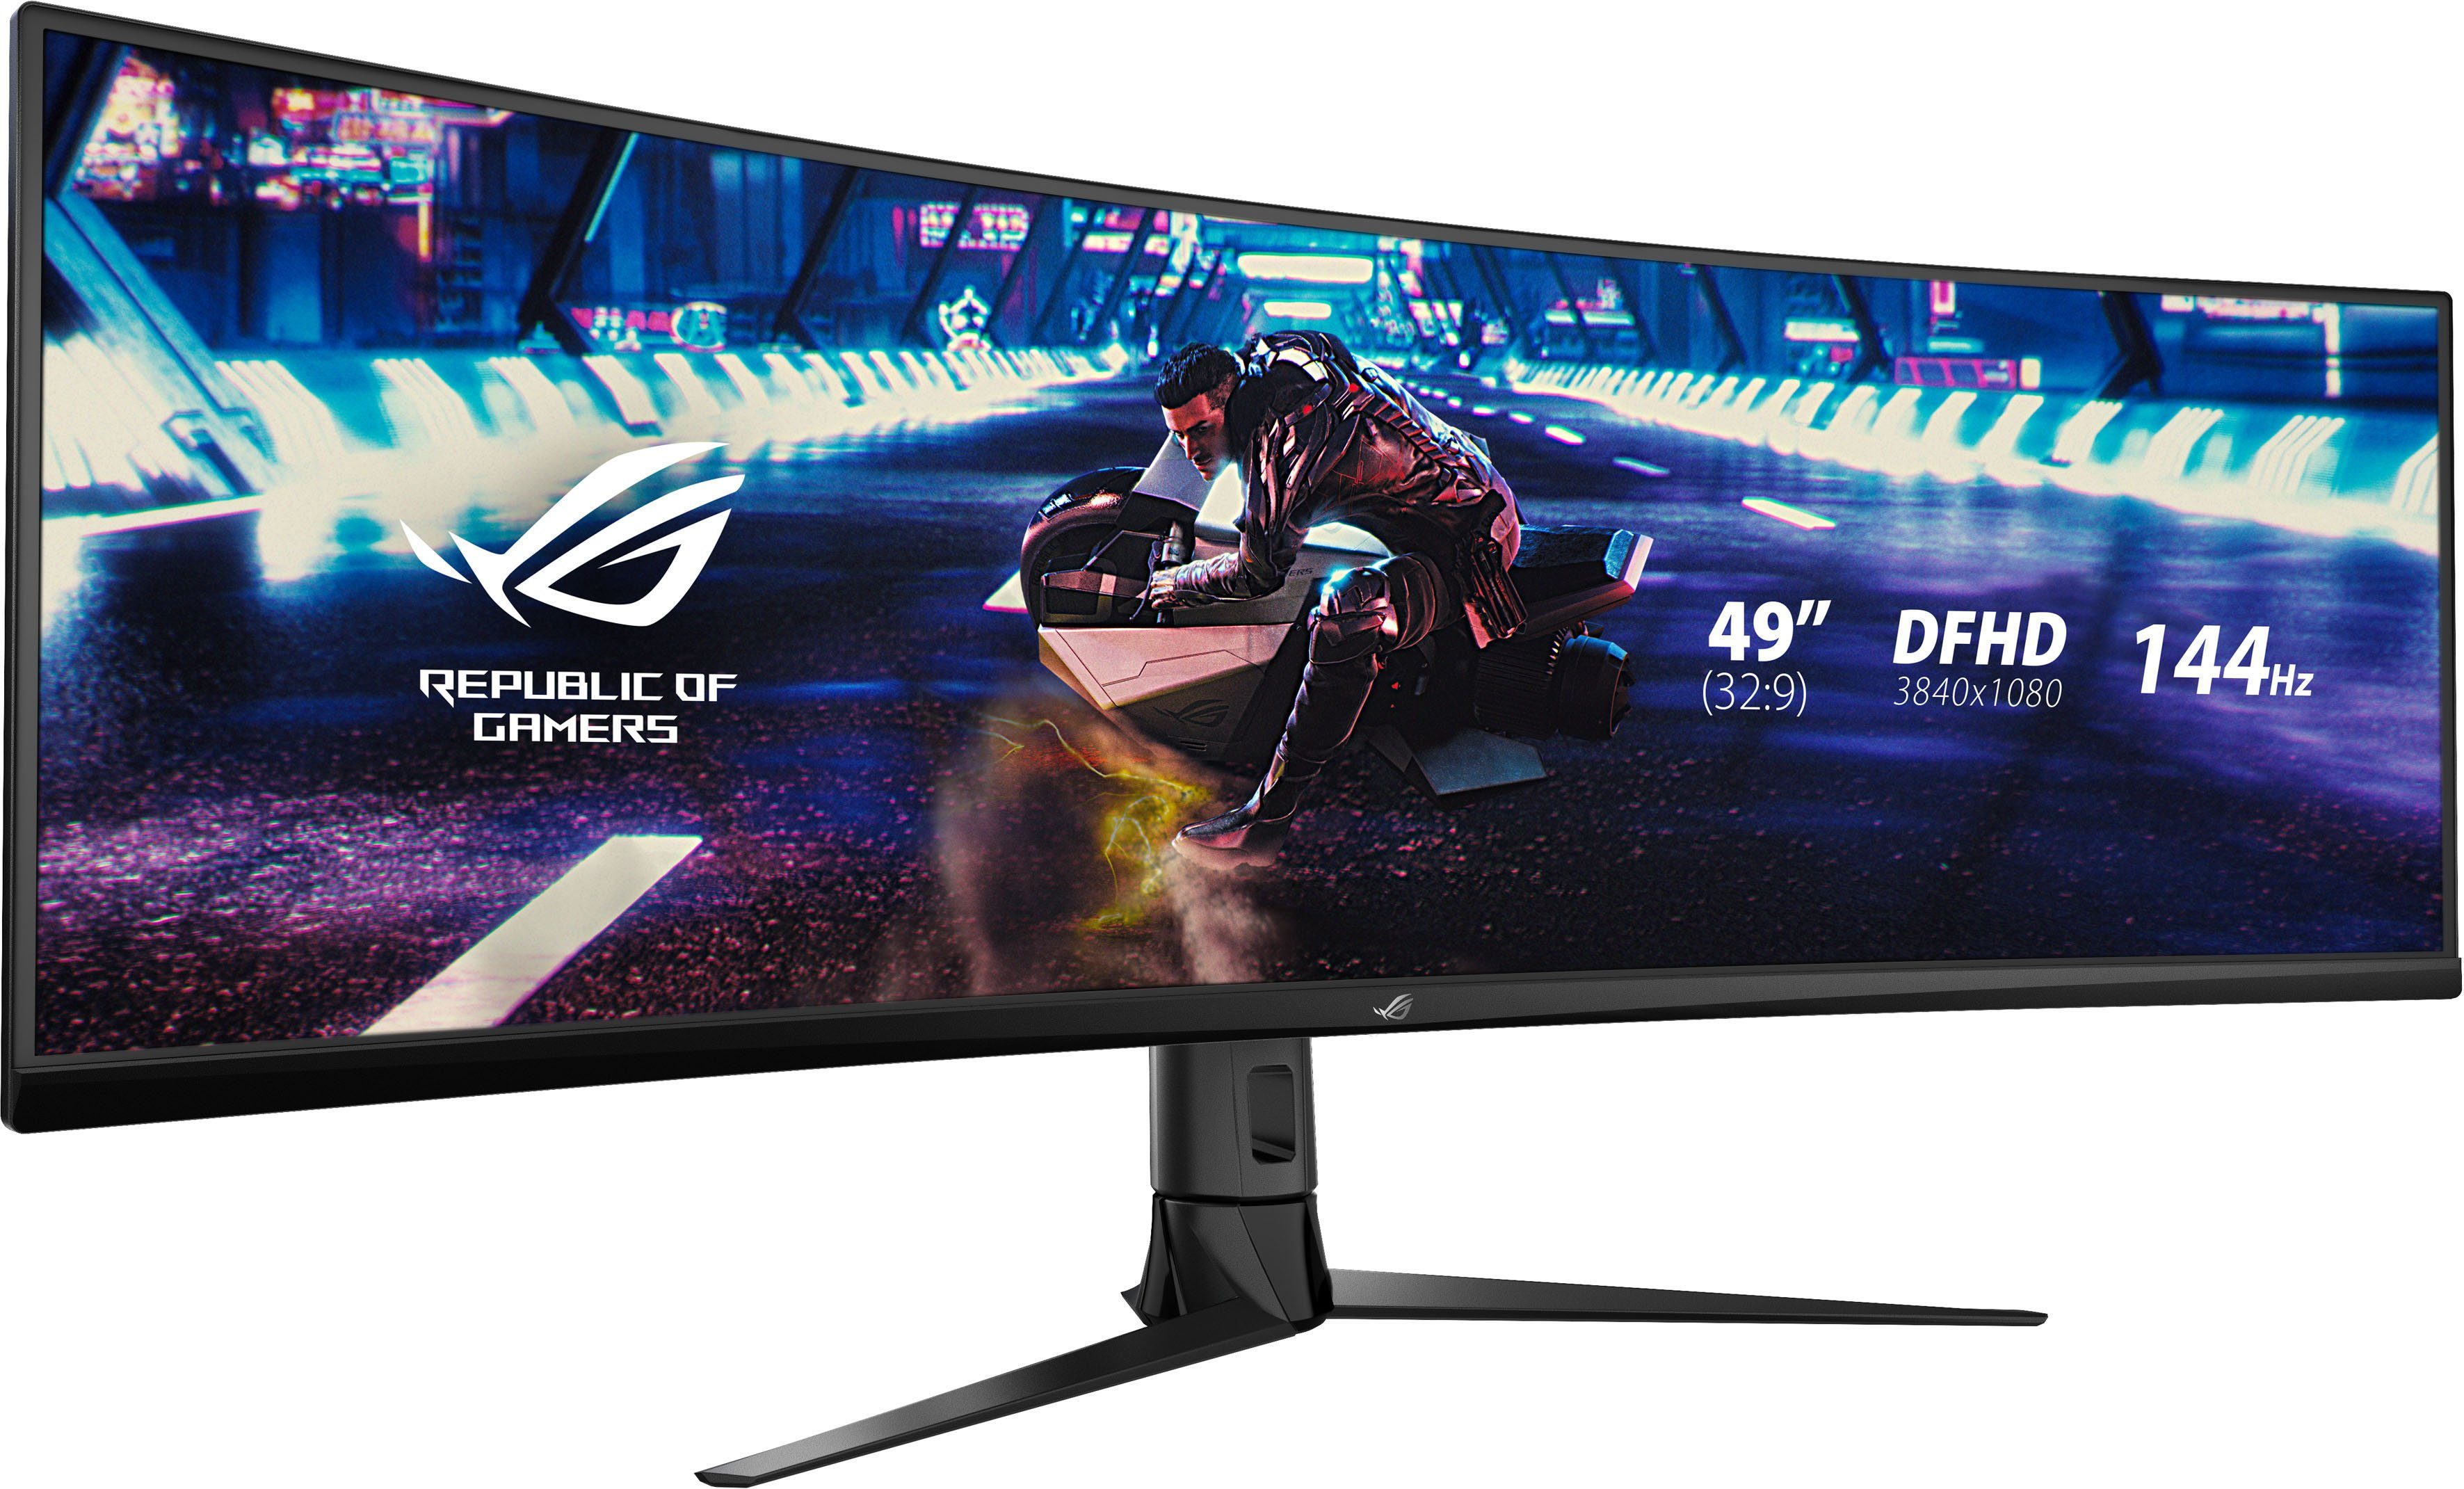 Asus XG49VQ Curved-Gaming-Monitor (124,46 HD, LED, Gaming ms cm/49 Monitor) 4 x px, VA Reaktionszeit, ", 1080 144 3840 Full Hz